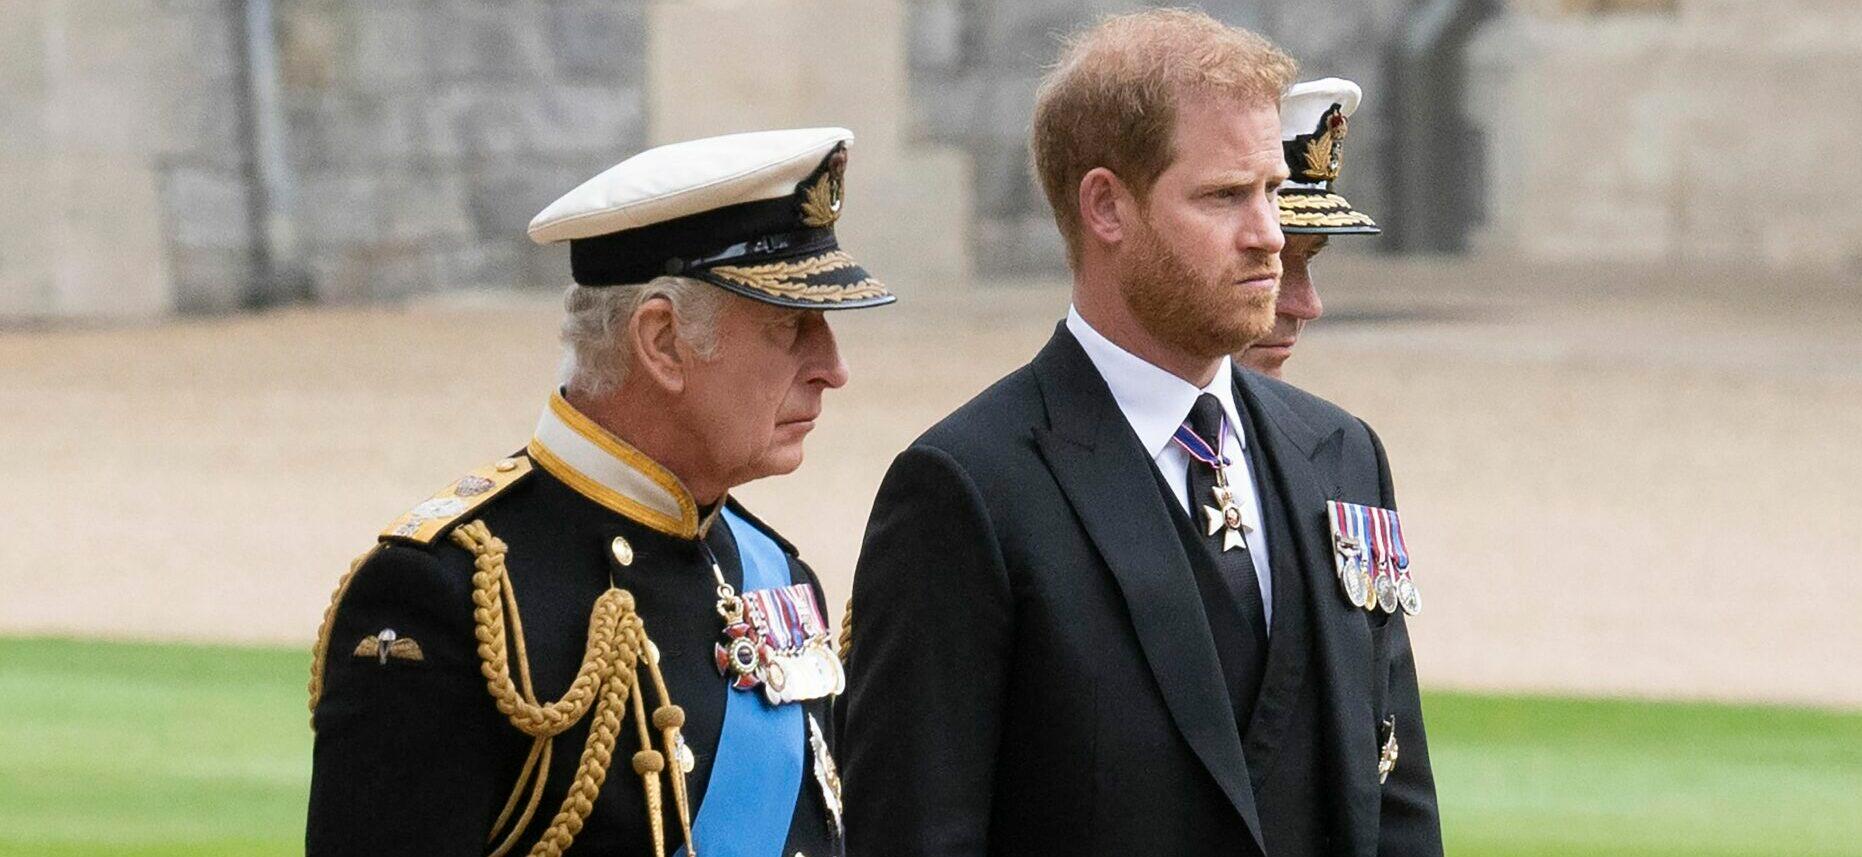 Prince Harry Reportedly Felt ‘Deeply Stung’ By King Charles’ ‘Snub’ During His UK Trip